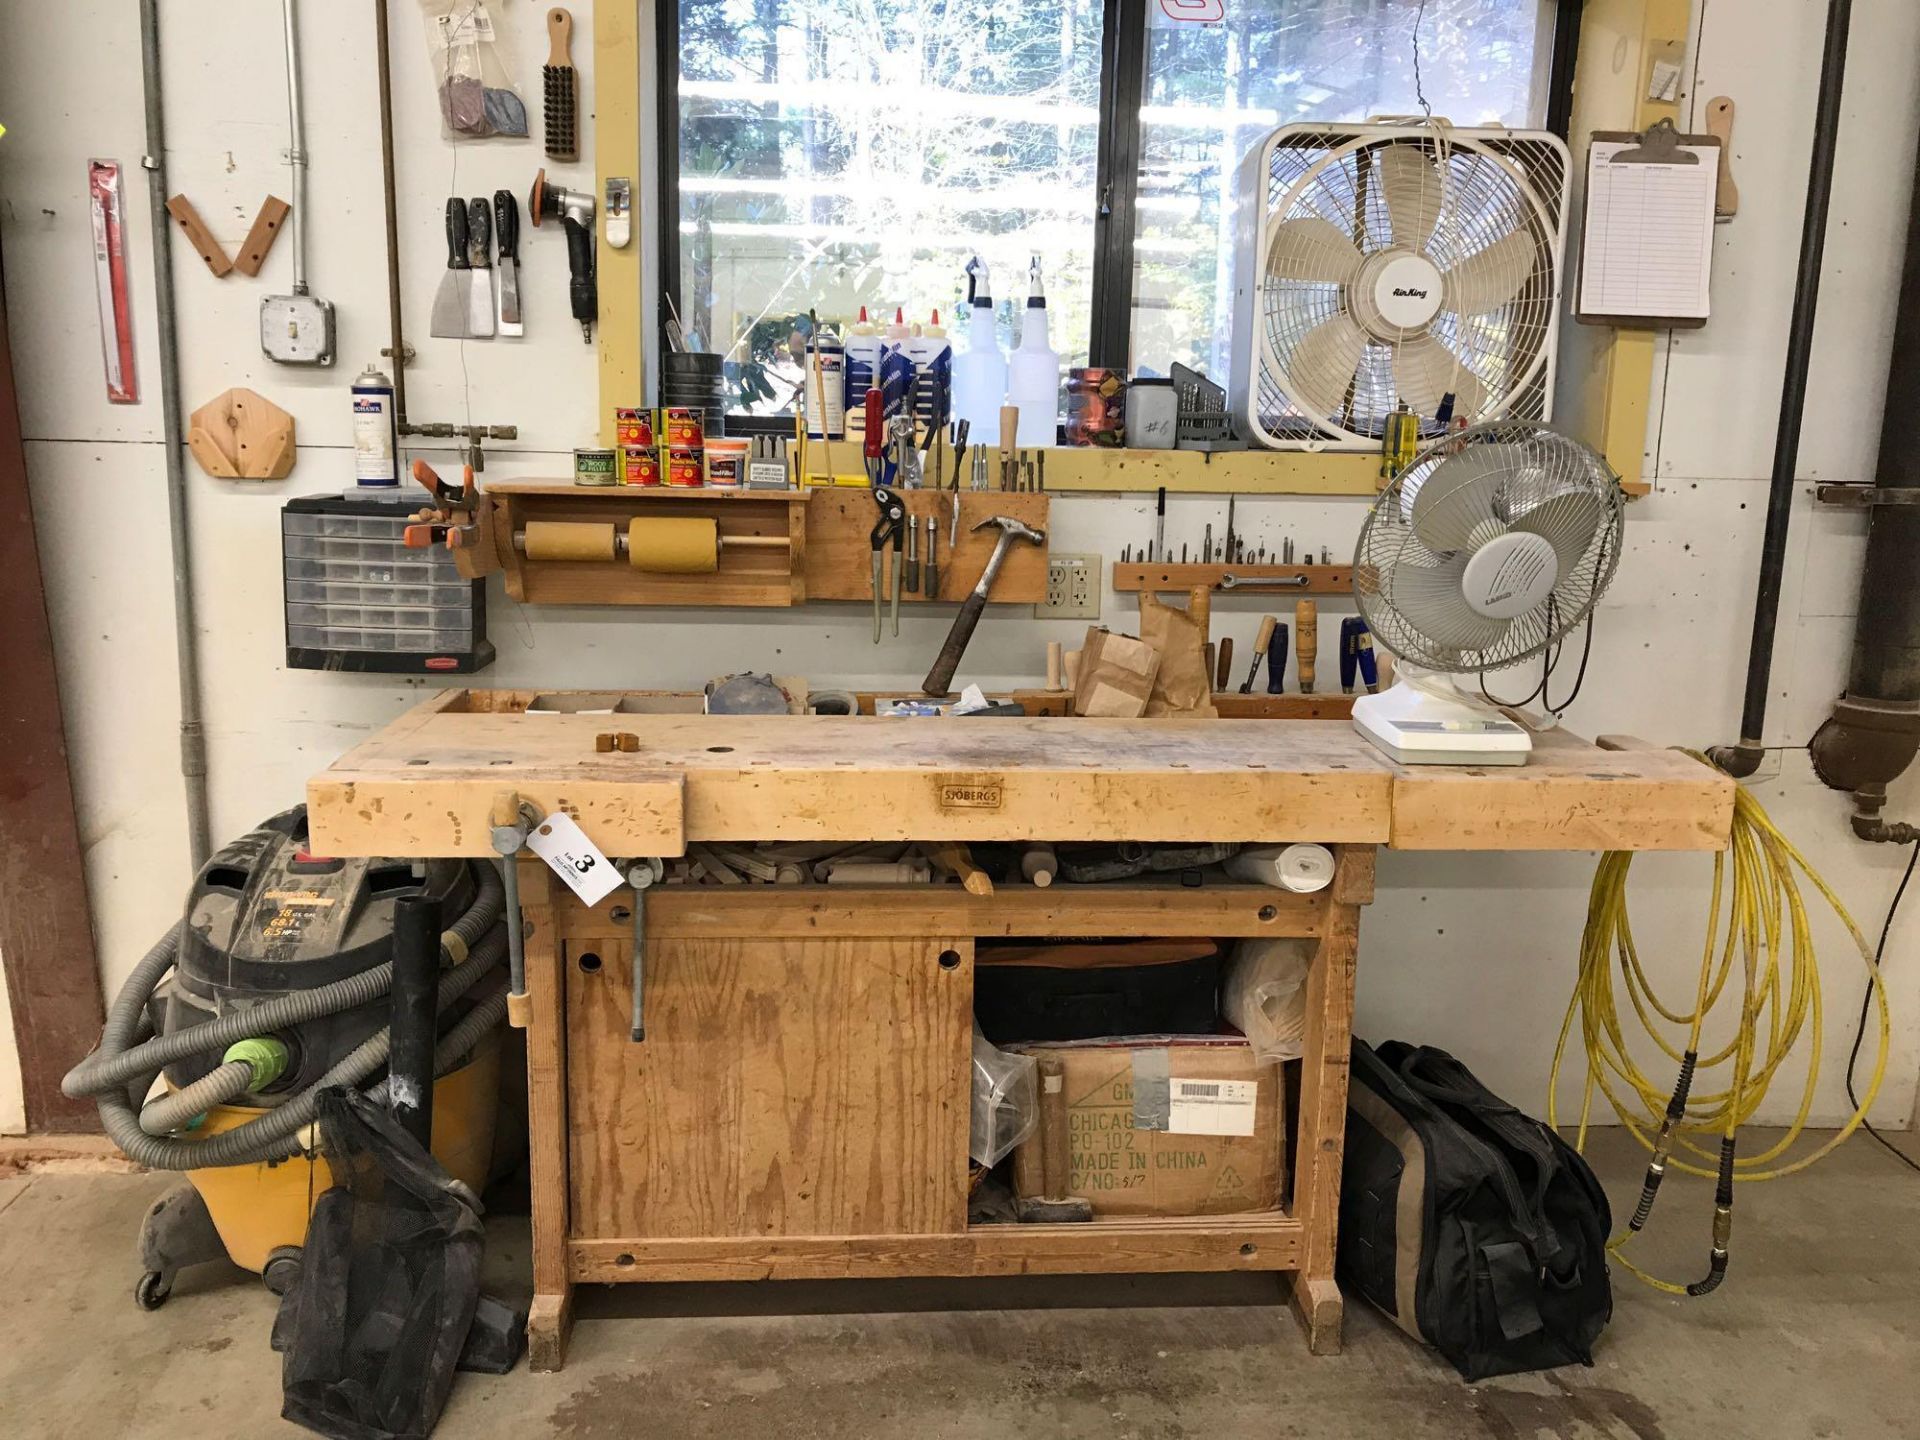 Work bench and assorted tools